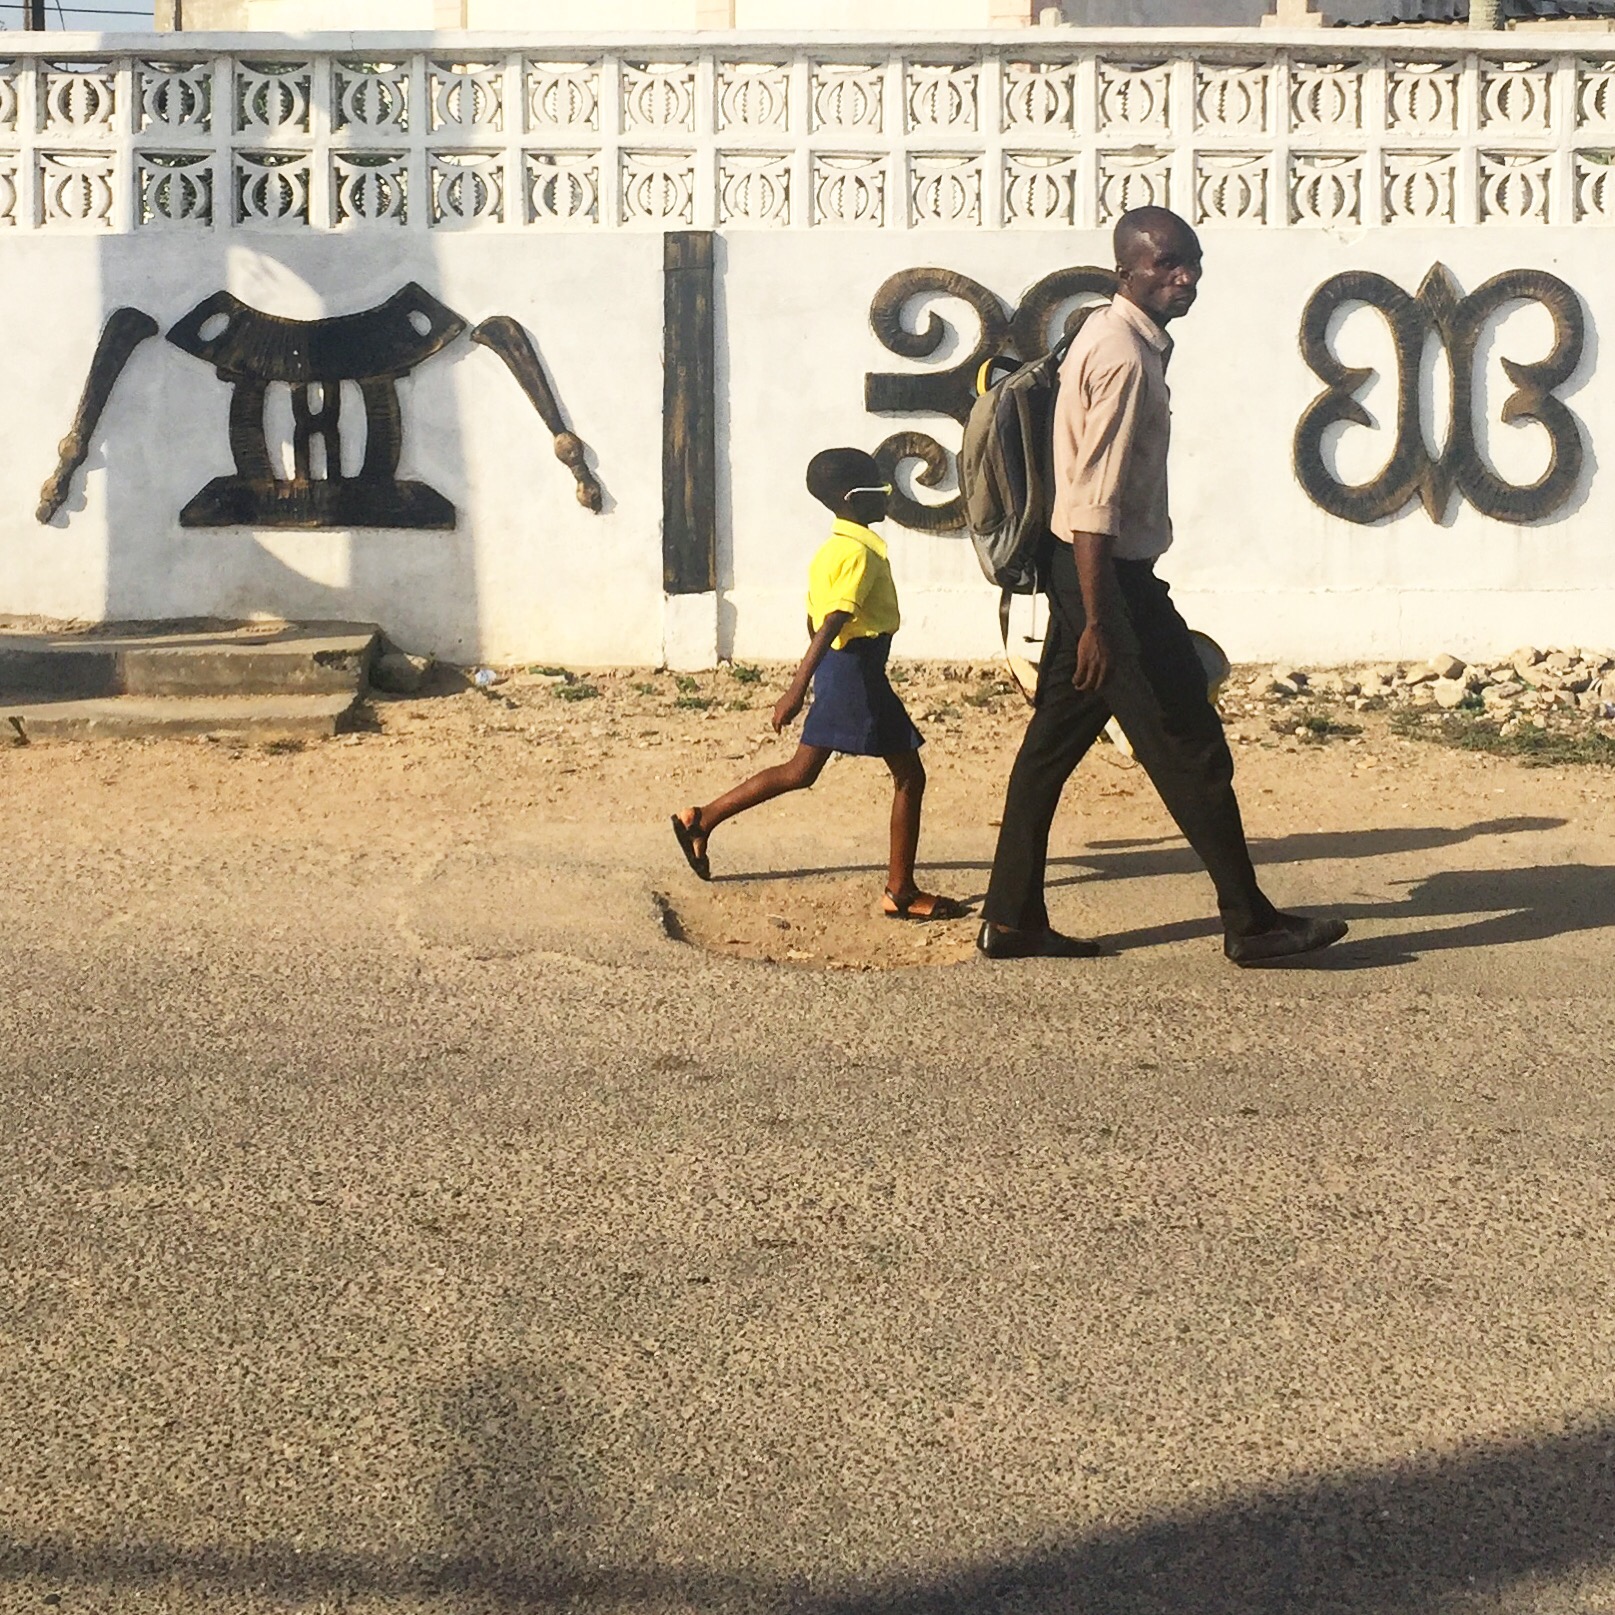 A man and young girl walking in front of a white wall with black adinkra symbols on it.